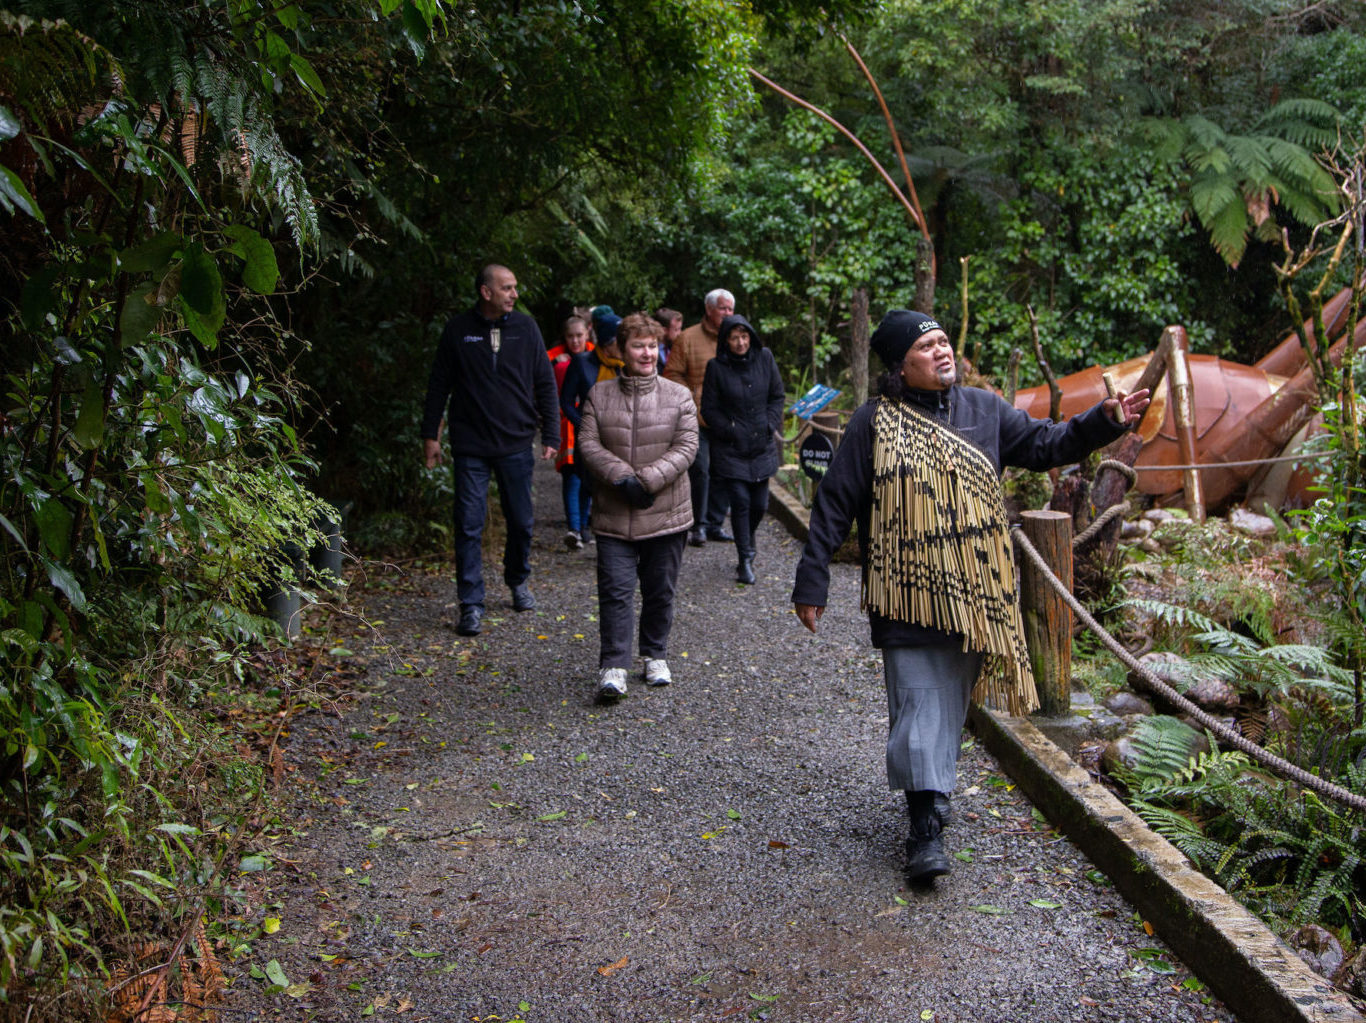 A guided tour at Pukaha National Wildlife Centre